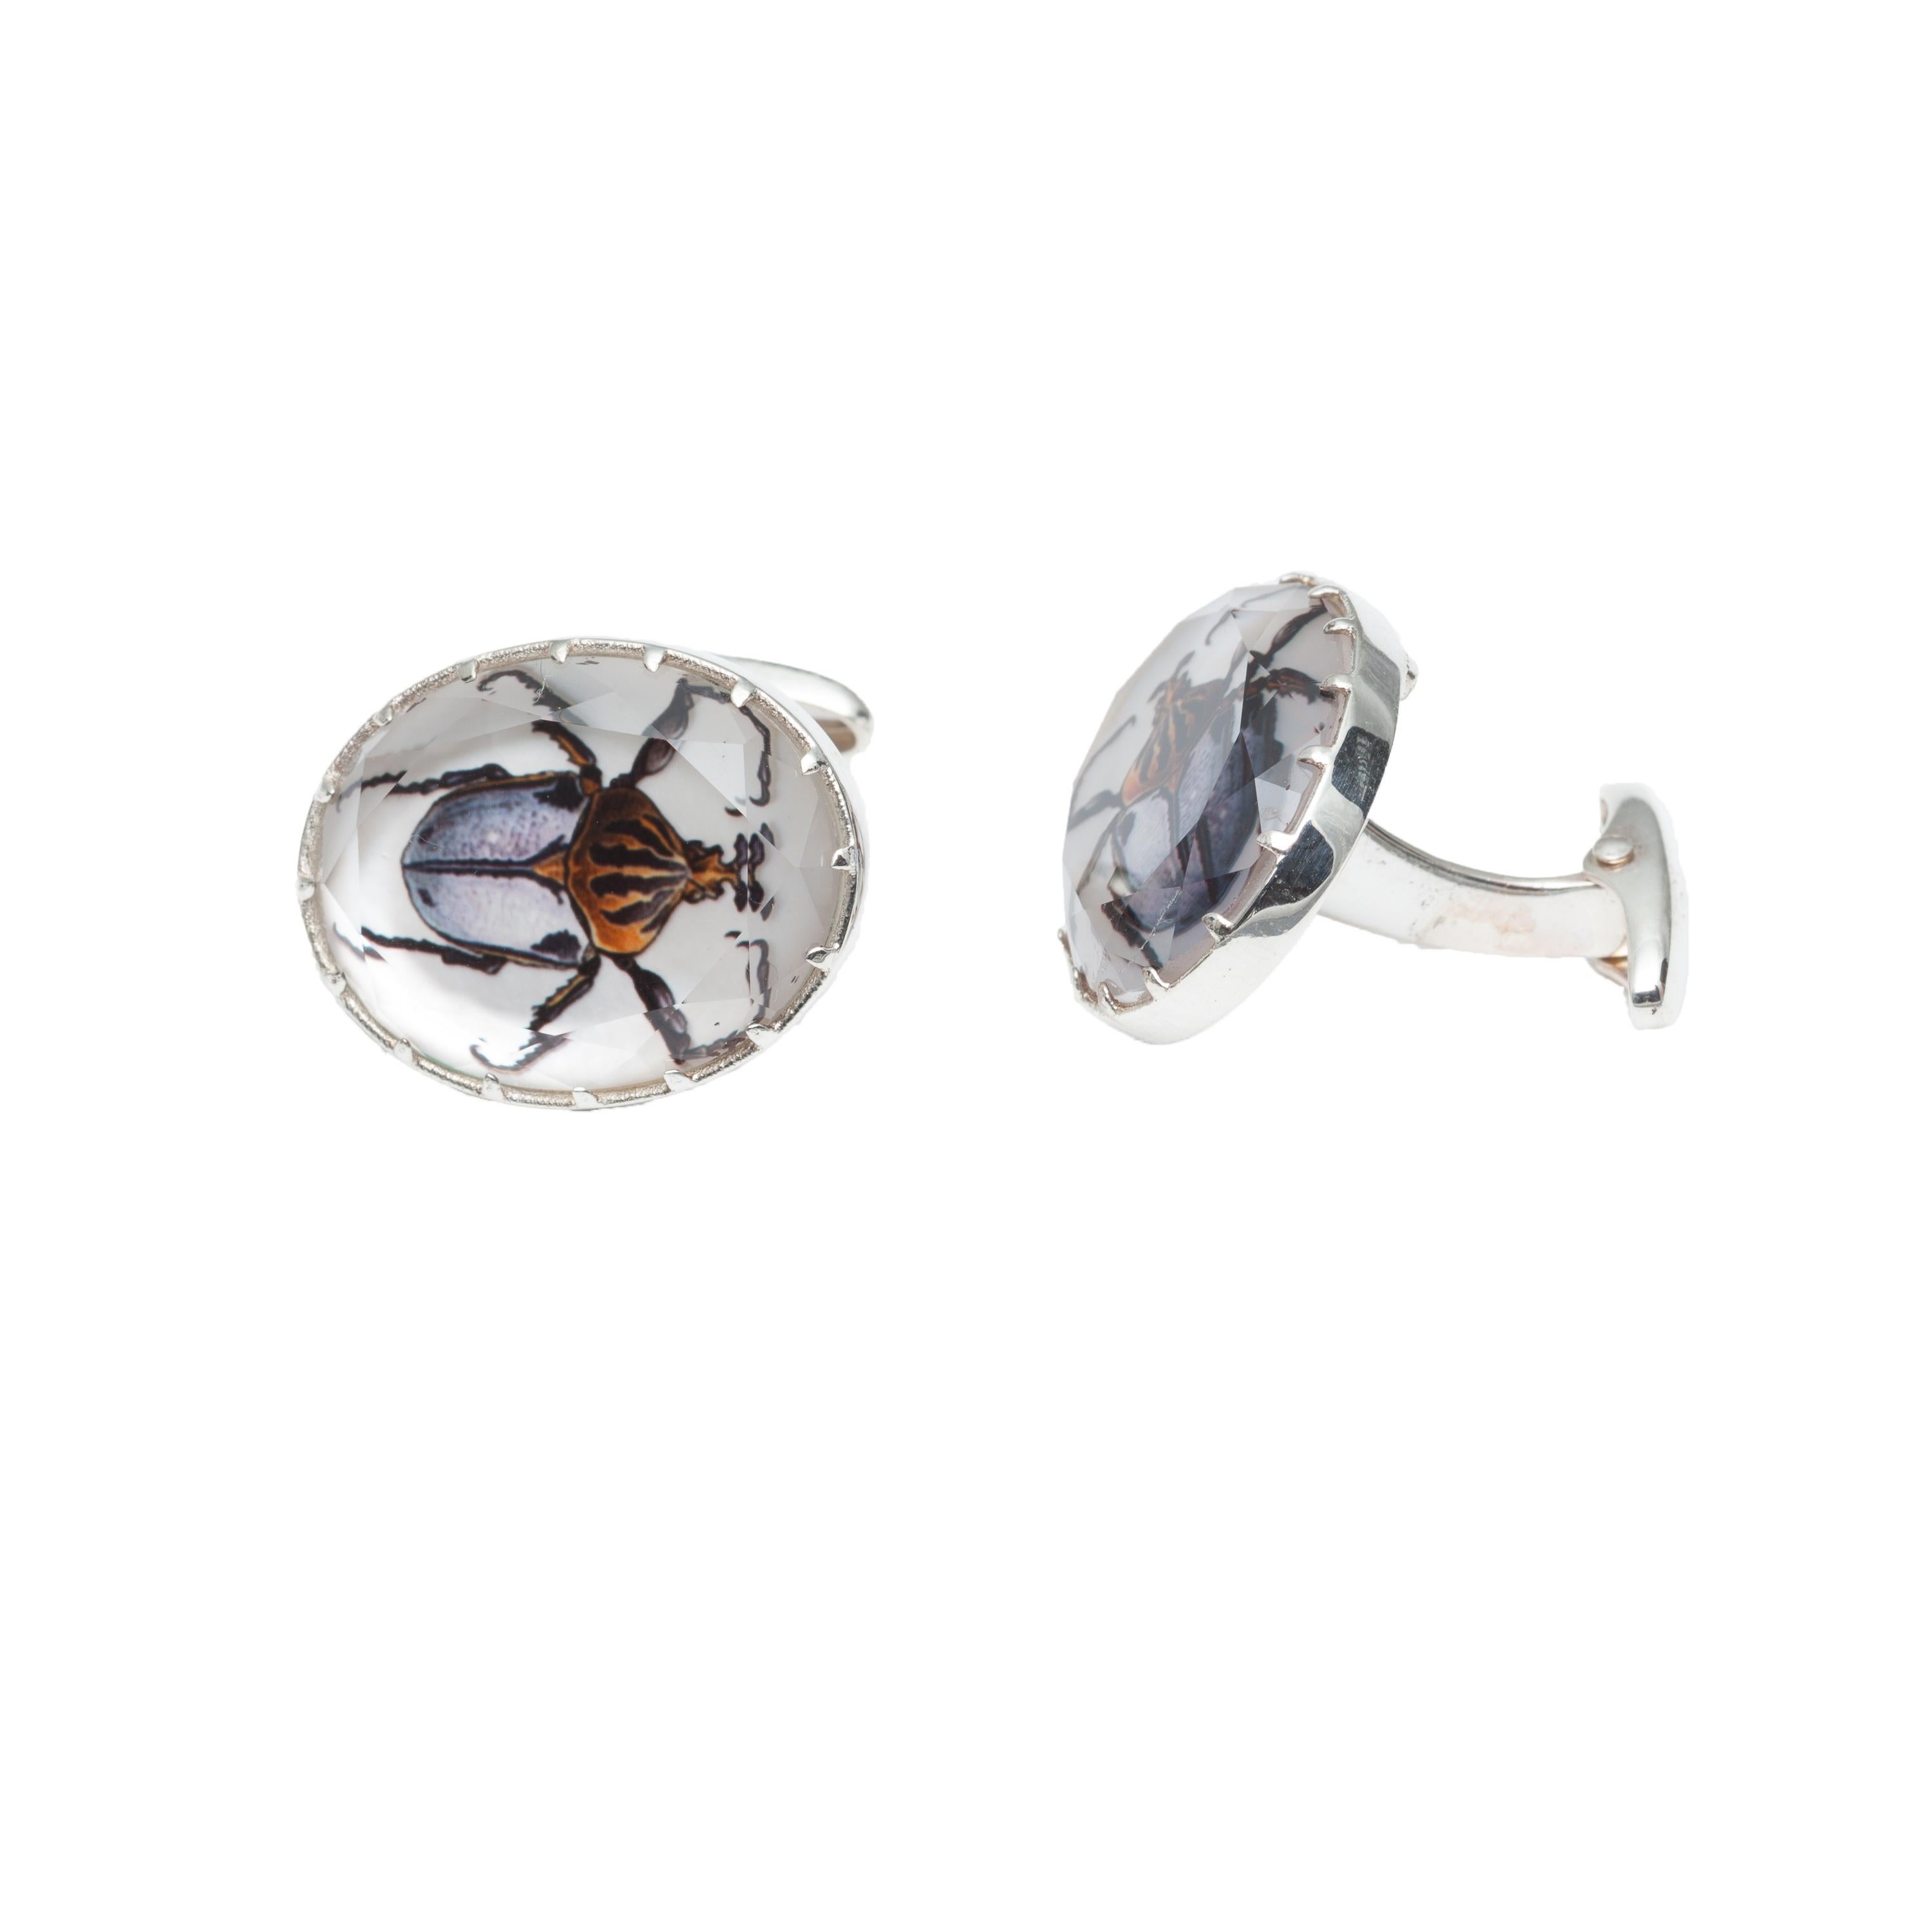 Oval Shaped Spencer Portrait Beetles in Rock Crystal Quartz and Mother of Pearl cufflinks.  Set in sterling silver (31.65CTW).  Frames Measure .875x75 inches.  
